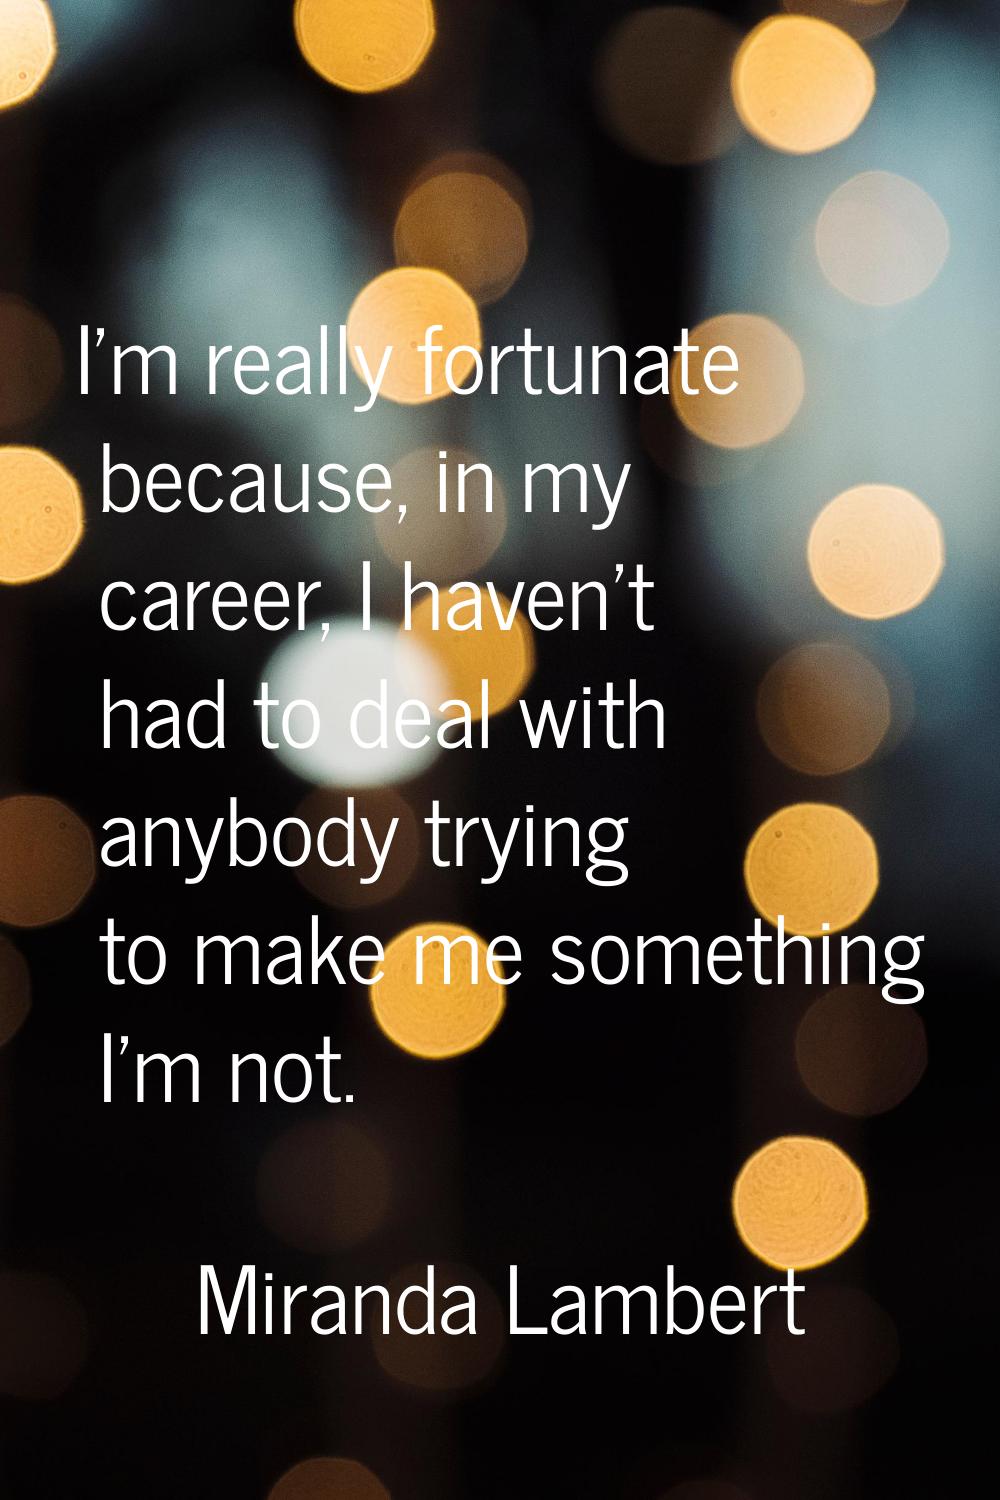 I'm really fortunate because, in my career, I haven't had to deal with anybody trying to make me so